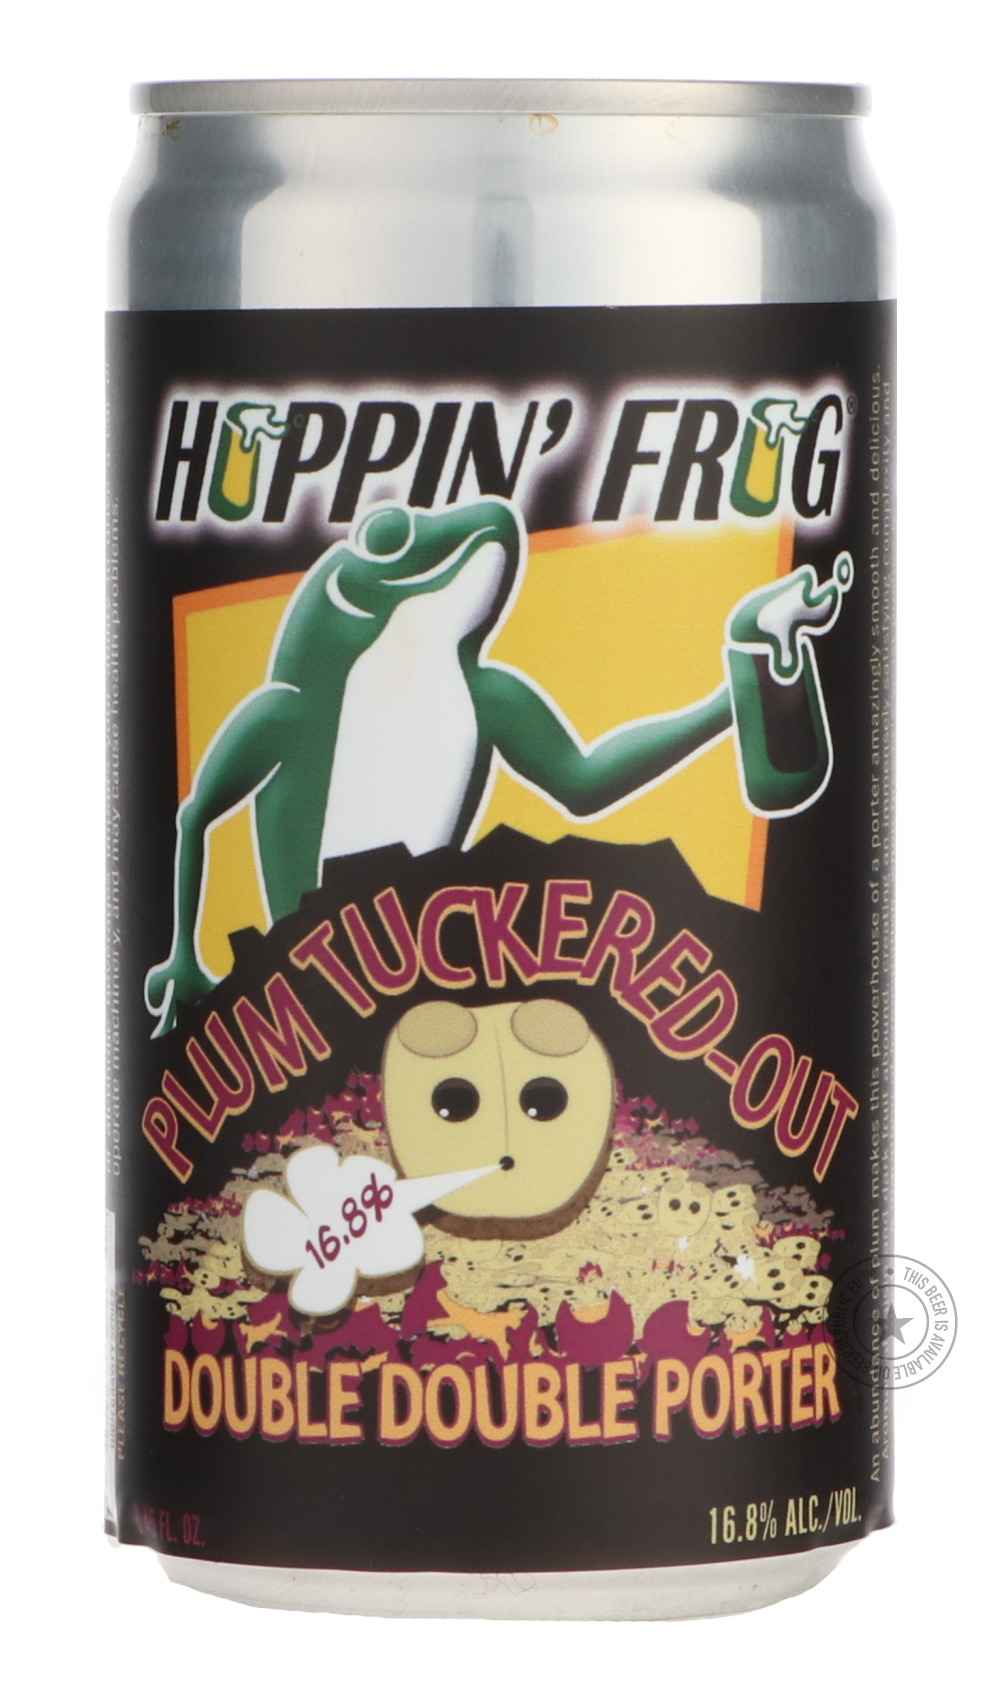 -Hoppin' Frog- Plum Tuckered-Out Double Double Porter-Stout & Porter- Only @ Beer Republic - The best online beer store for American & Canadian craft beer - Buy beer online from the USA and Canada - Bier online kopen - Amerikaans bier kopen - Craft beer store - Craft beer kopen - Amerikanisch bier kaufen - Bier online kaufen - Acheter biere online - IPA - Stout - Porter - New England IPA - Hazy IPA - Imperial Stout - Barrel Aged - Barrel Aged Imperial Stout - Brown - Dark beer - Blond - Blonde - Pilsner - L